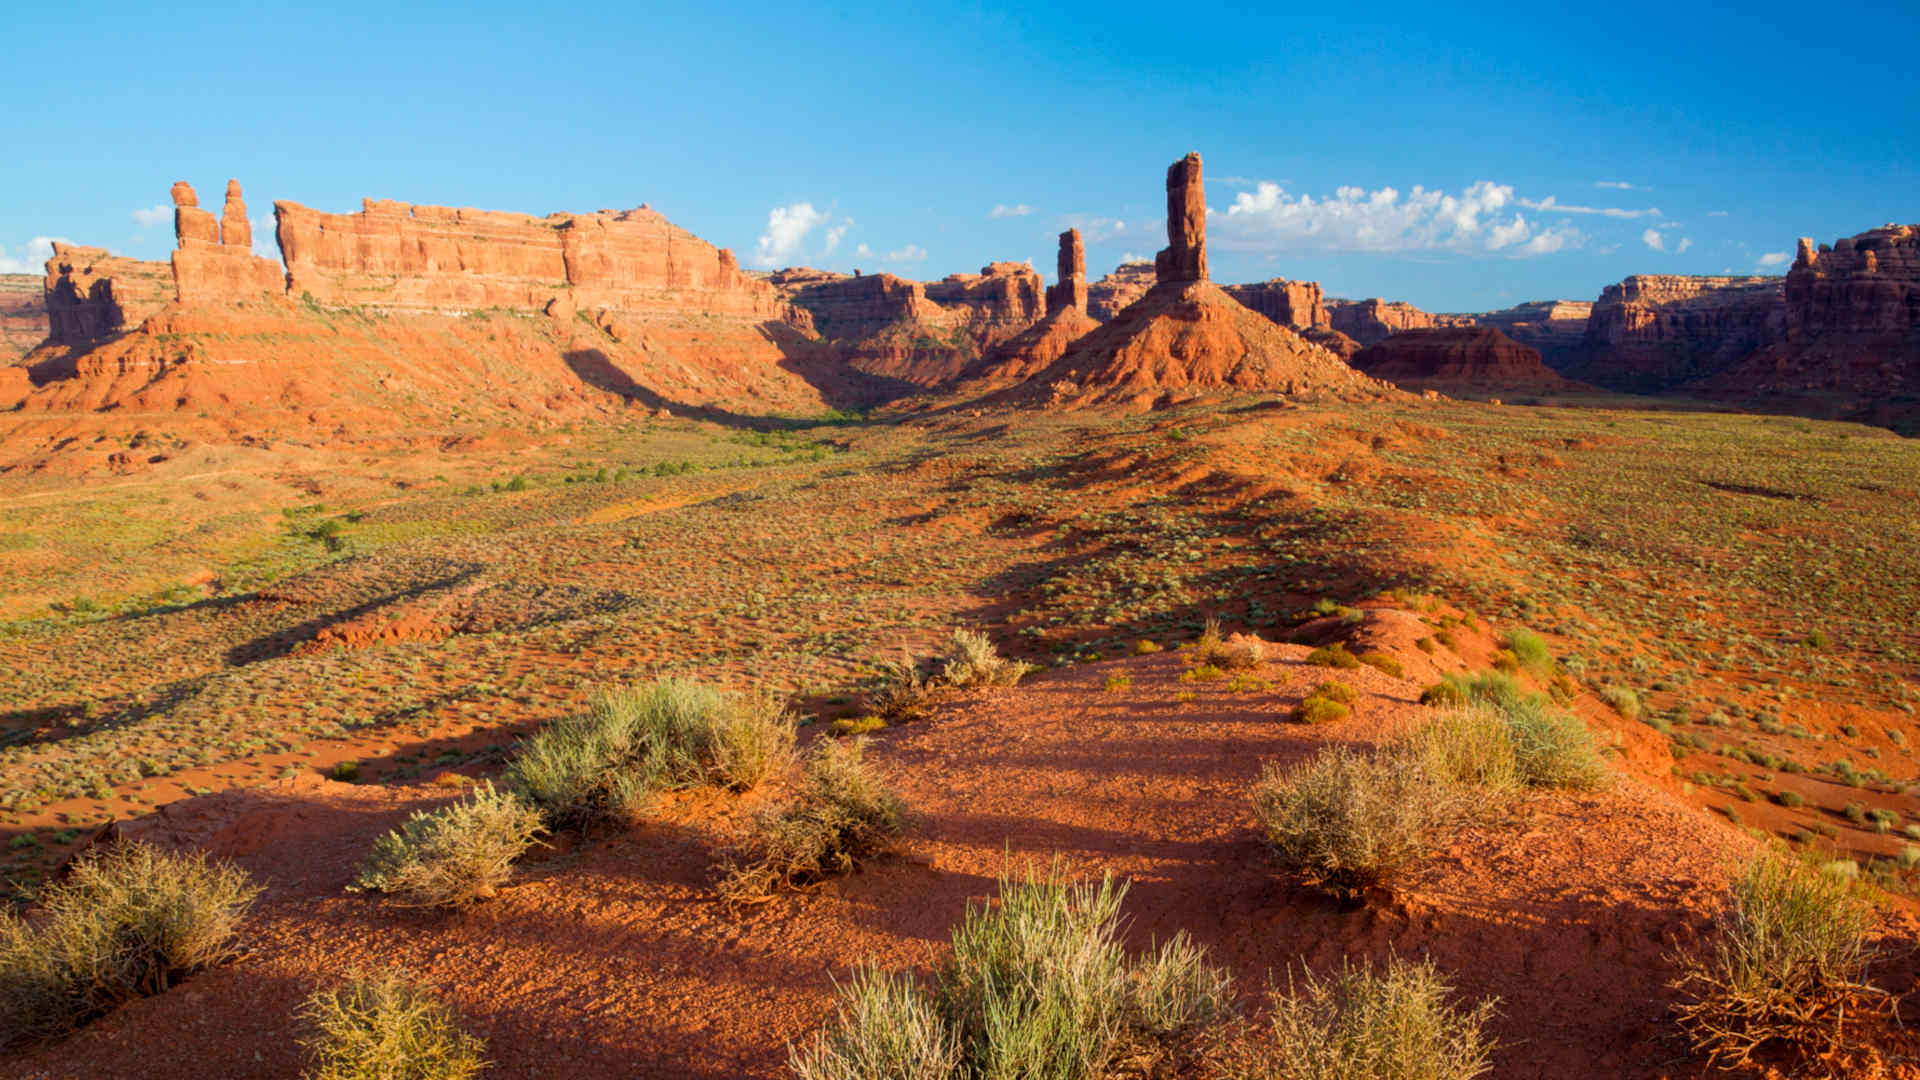 The Valley of the Gods, a scenic valley within Bears Ears National Monument.